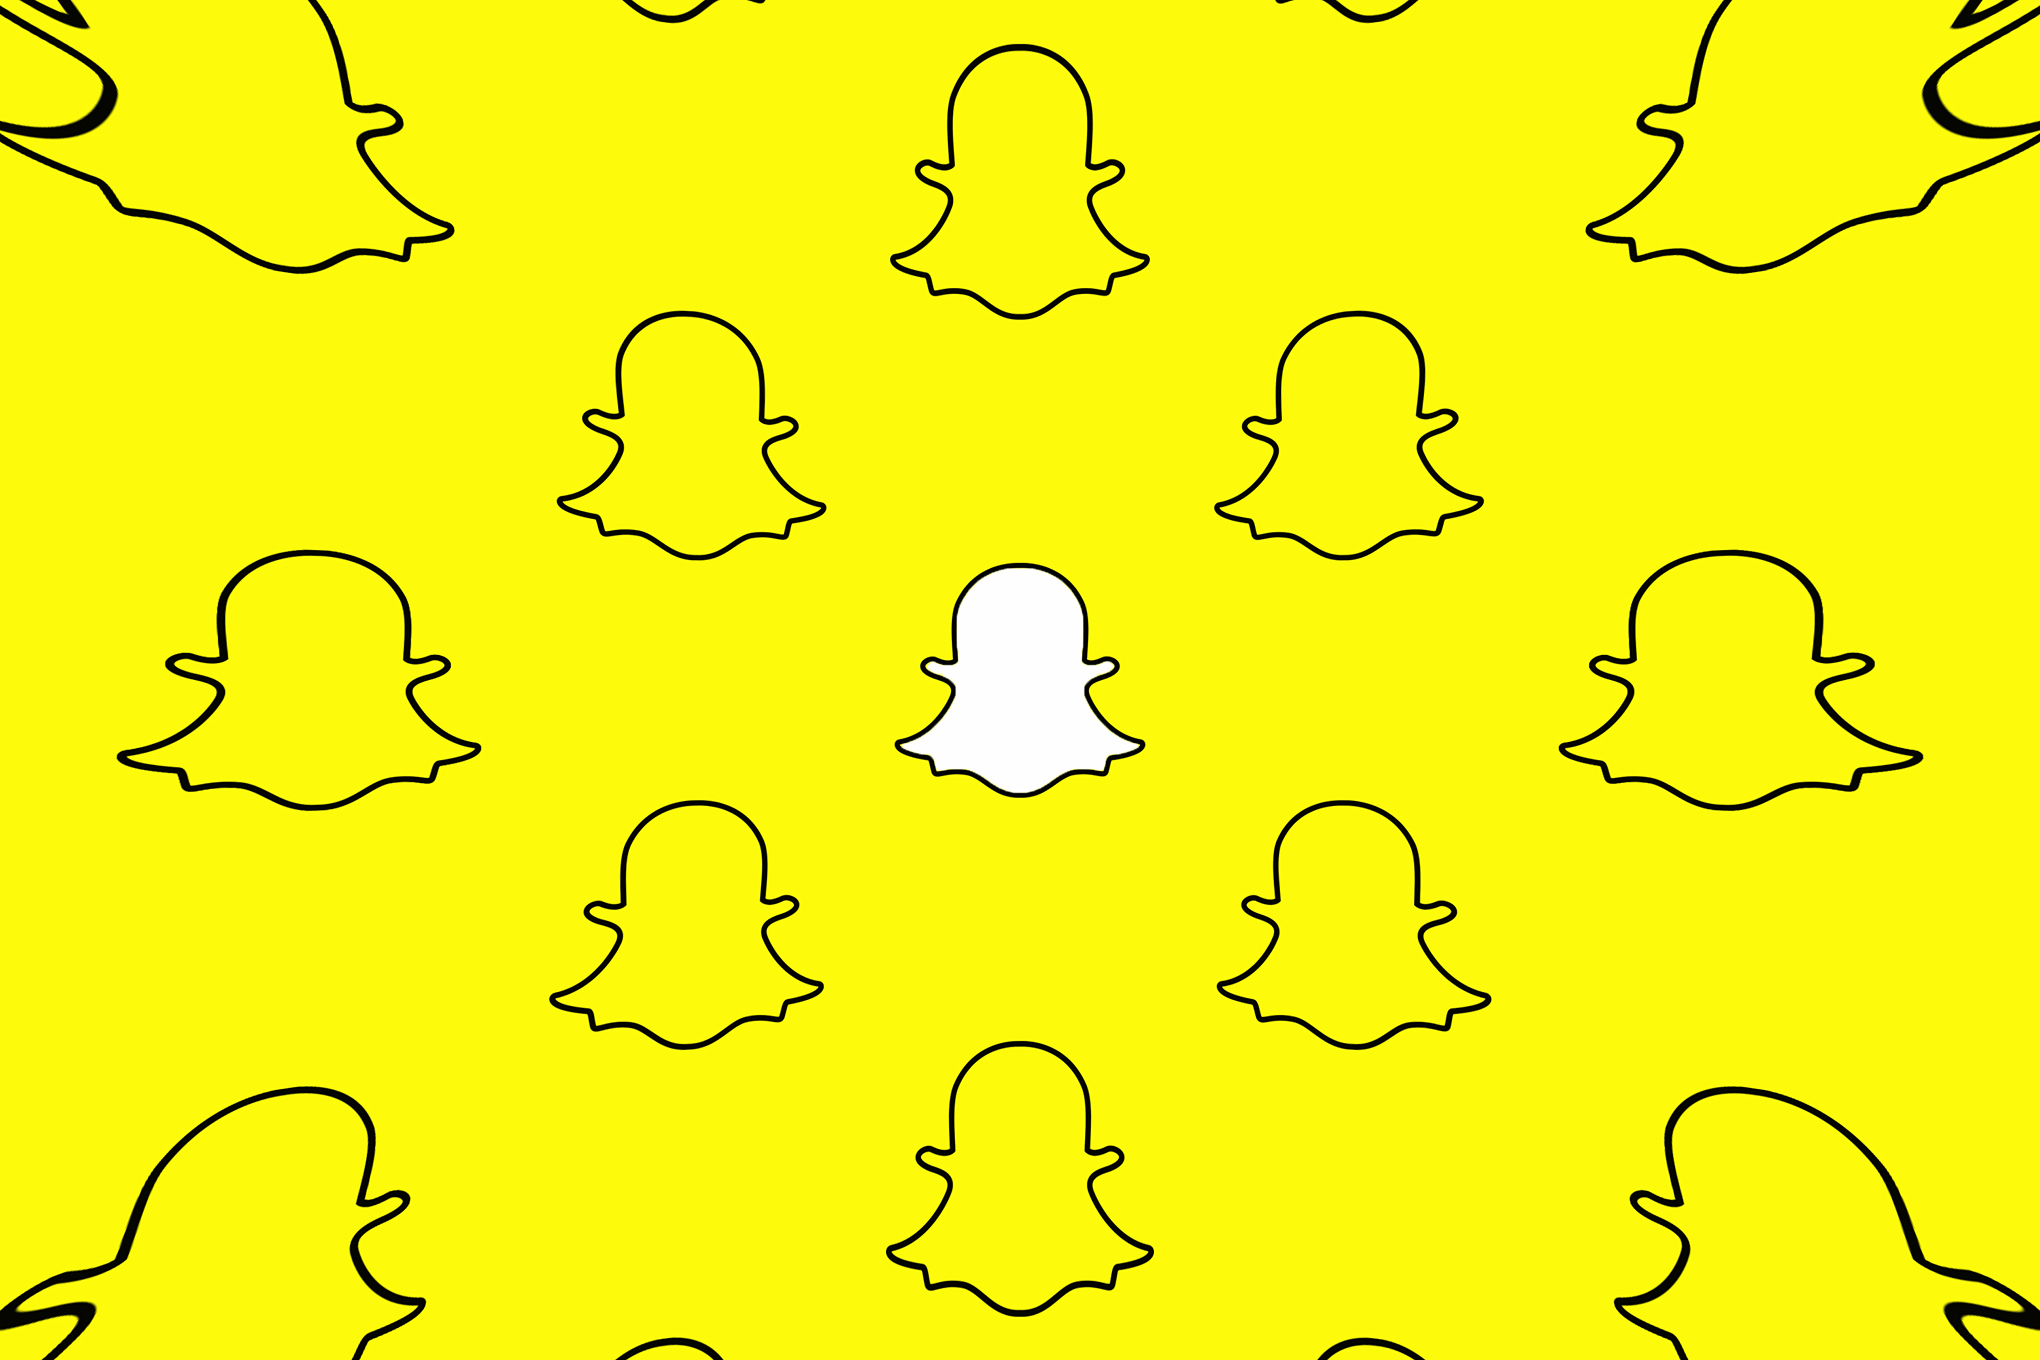 The Snapchat white ghost logo on a bright yellow background.